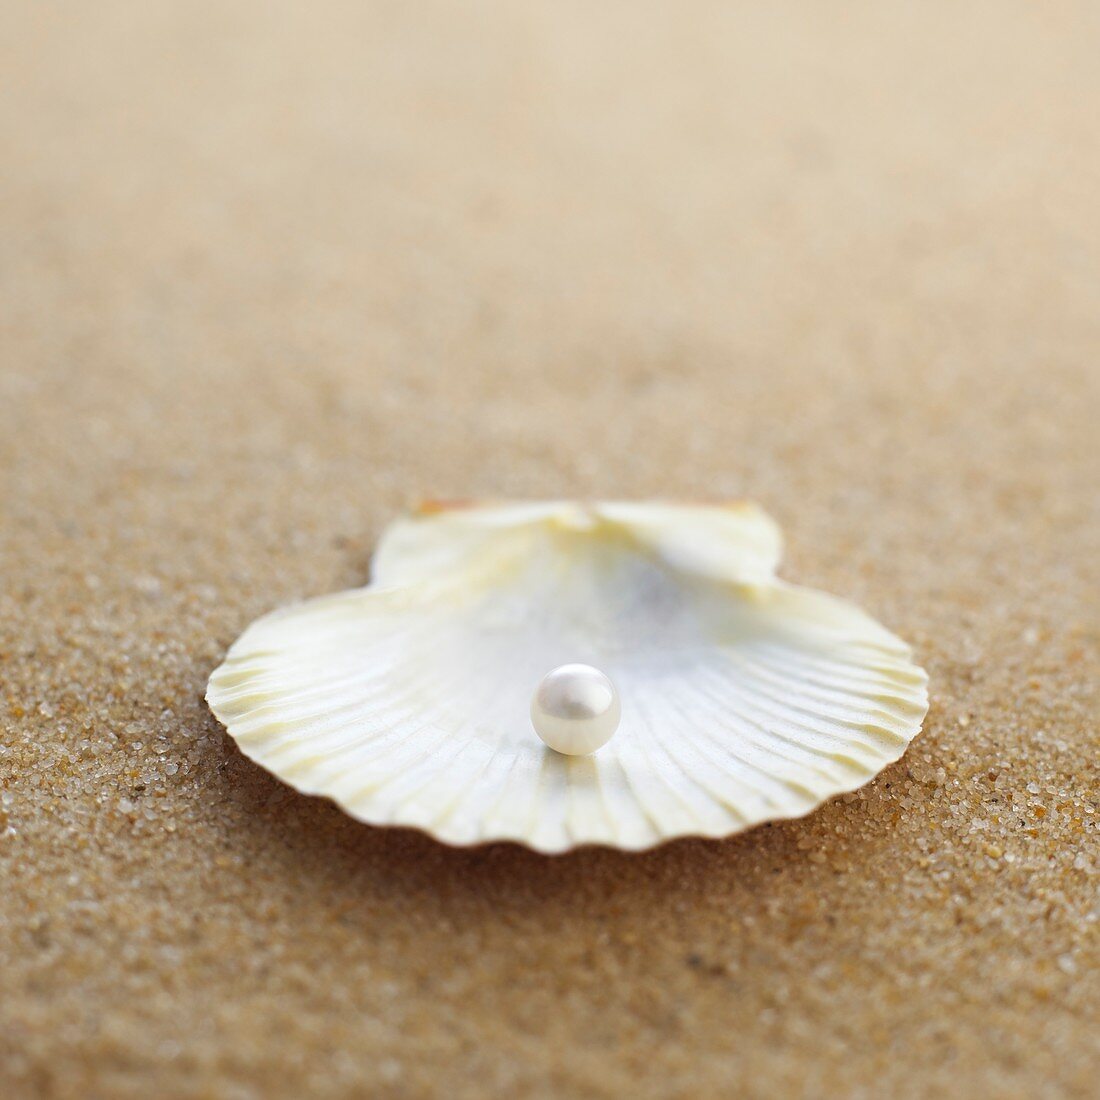 Clam shell with pearl inside